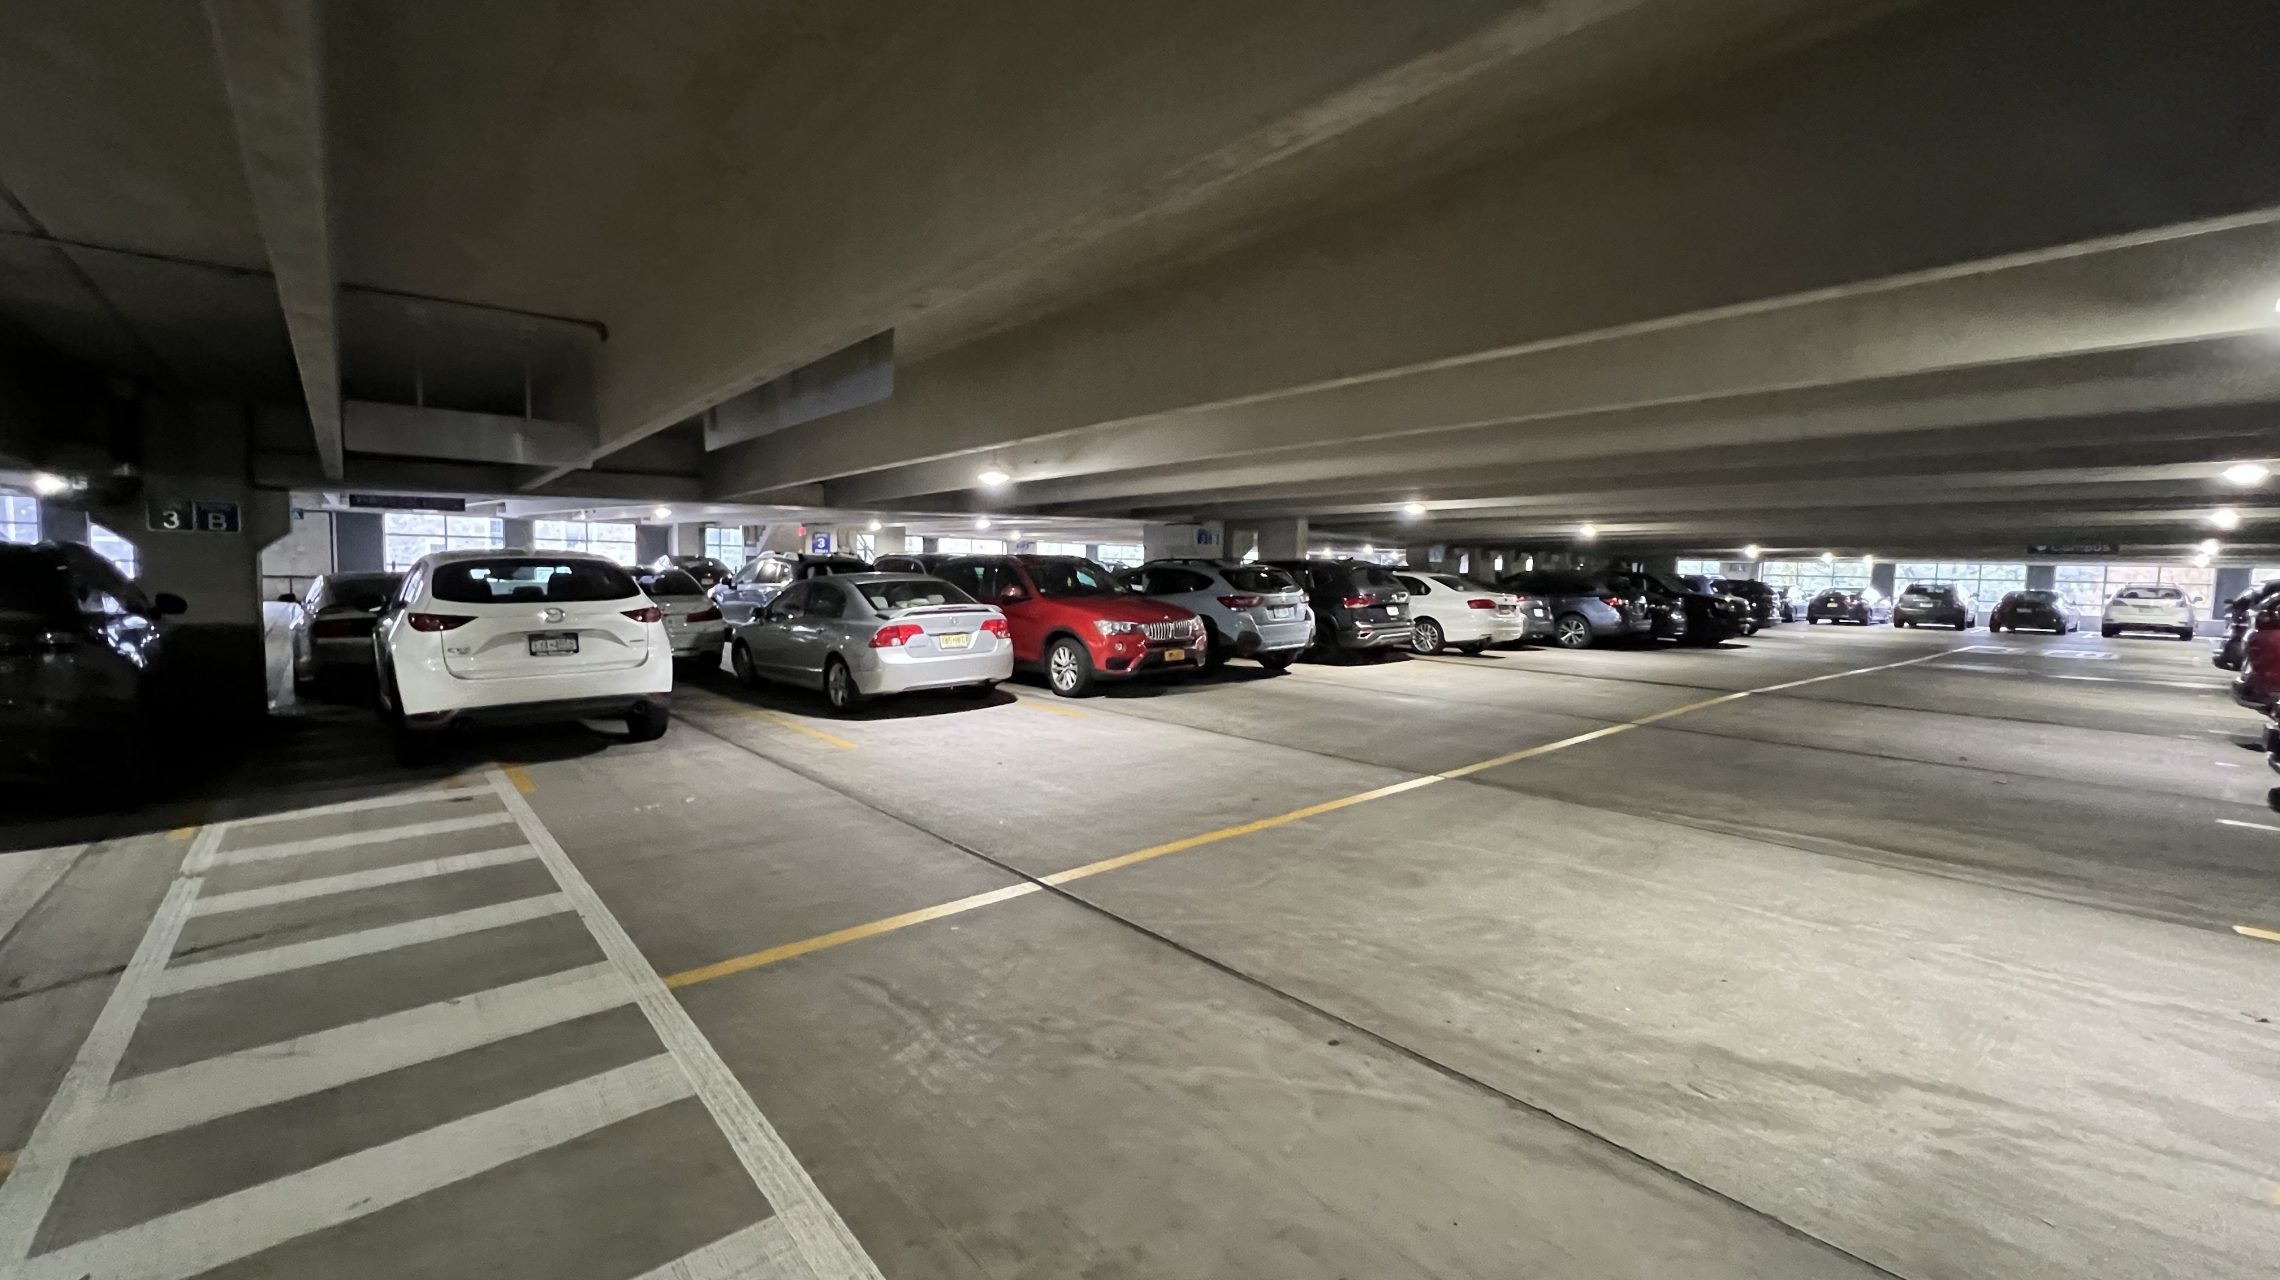 Cars parked in a double-tee parking structure, showing deck joints